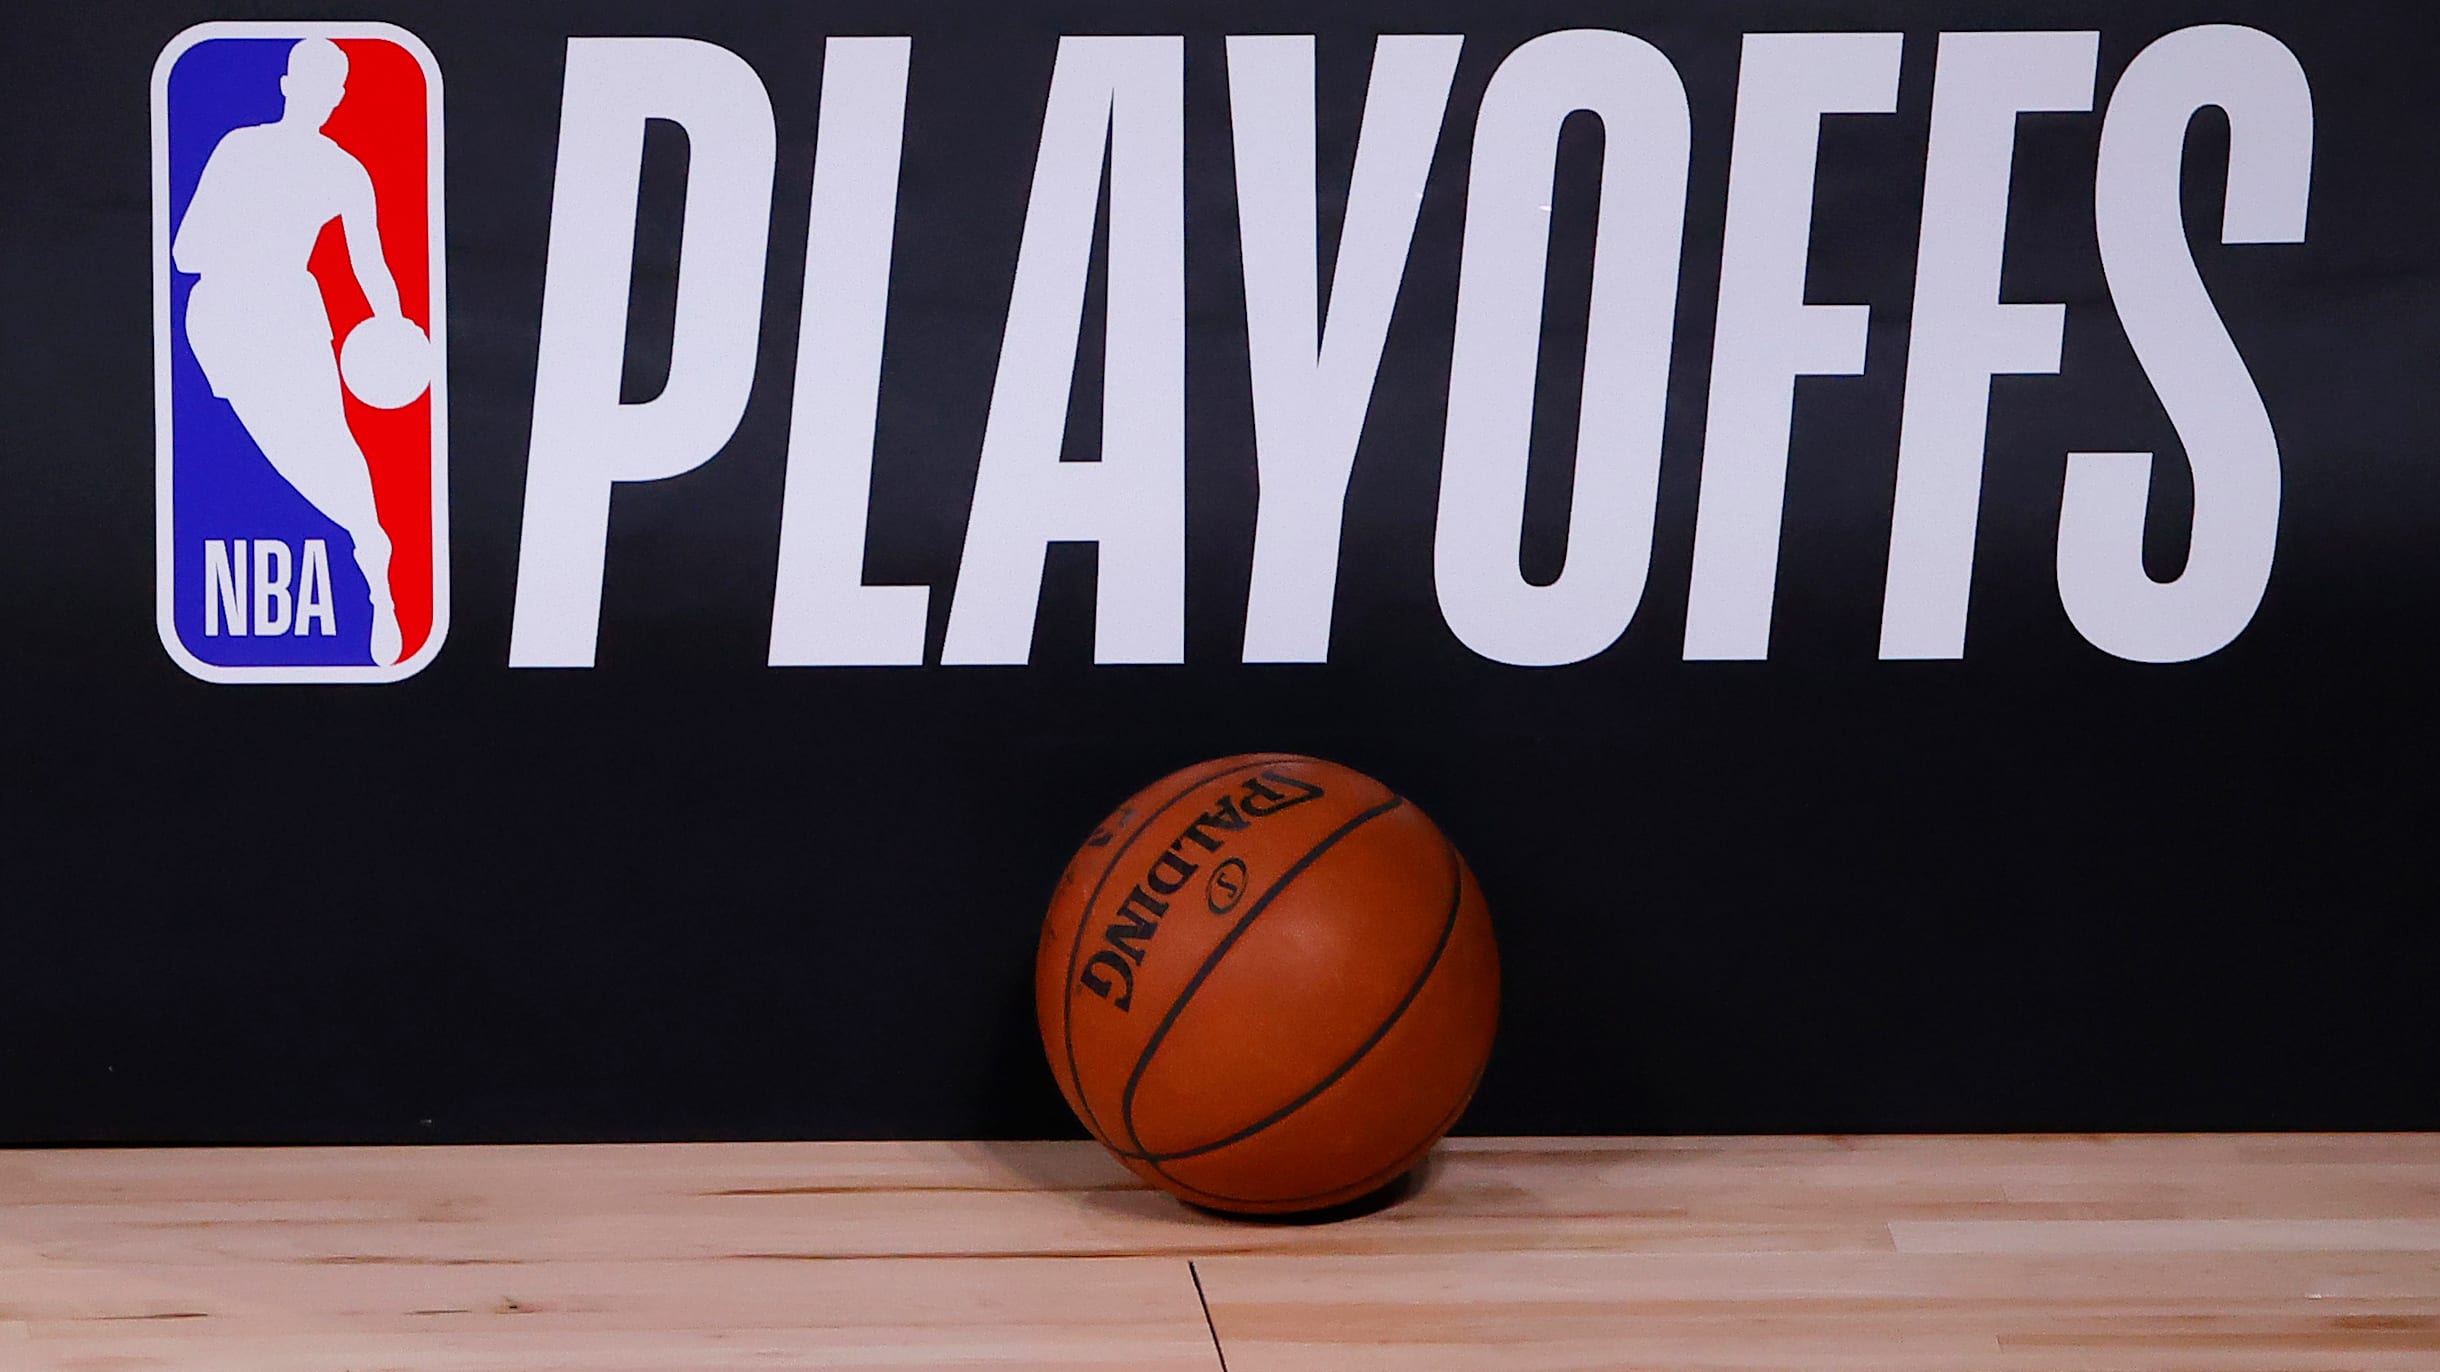 NBA Playoffs 2021: Schedule, players to watch, top teams, & more